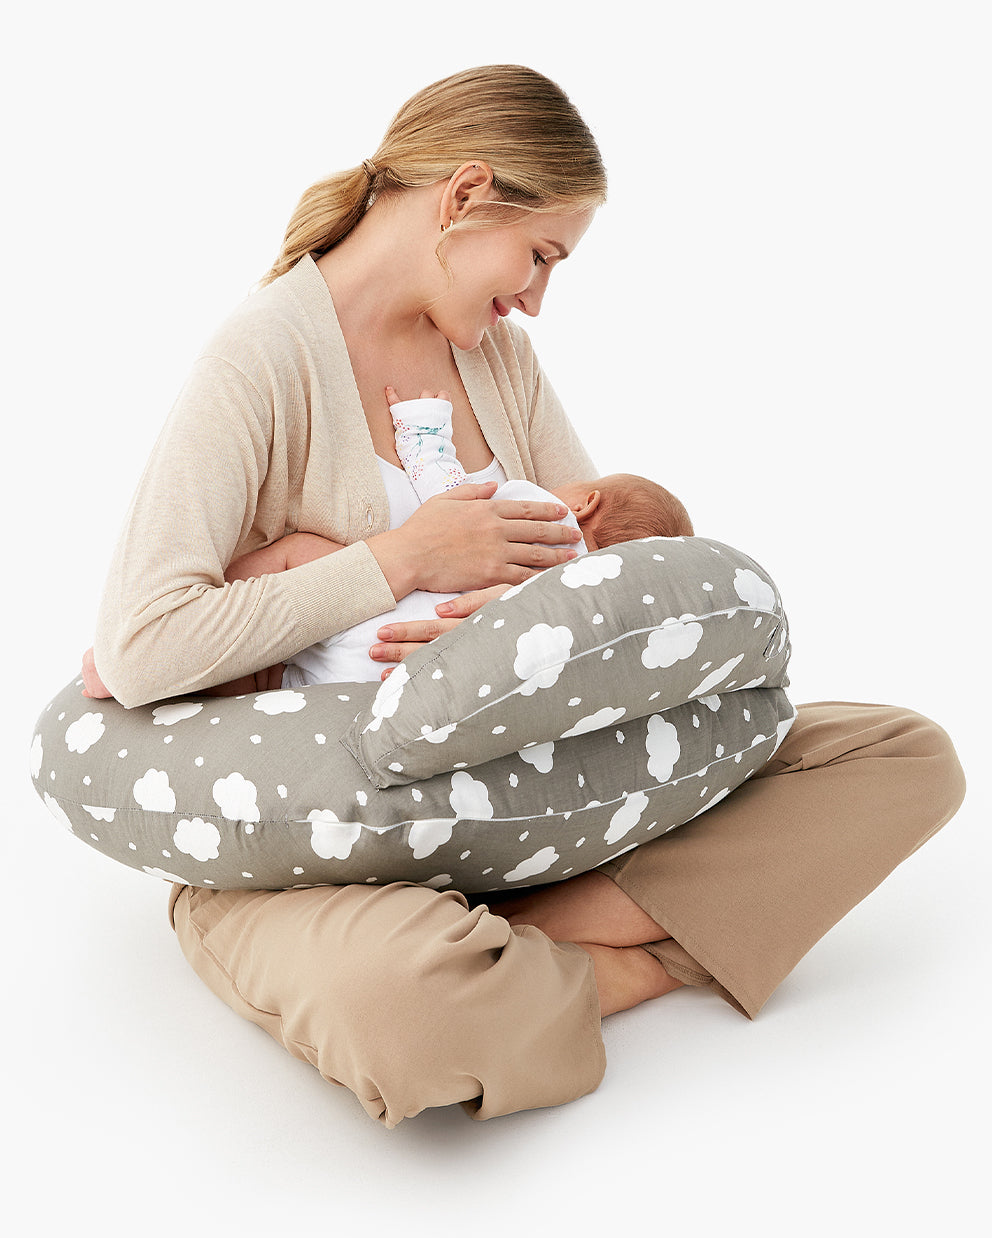 Nursing Pillow with Organic Fabric + Waterproof Cover (New)